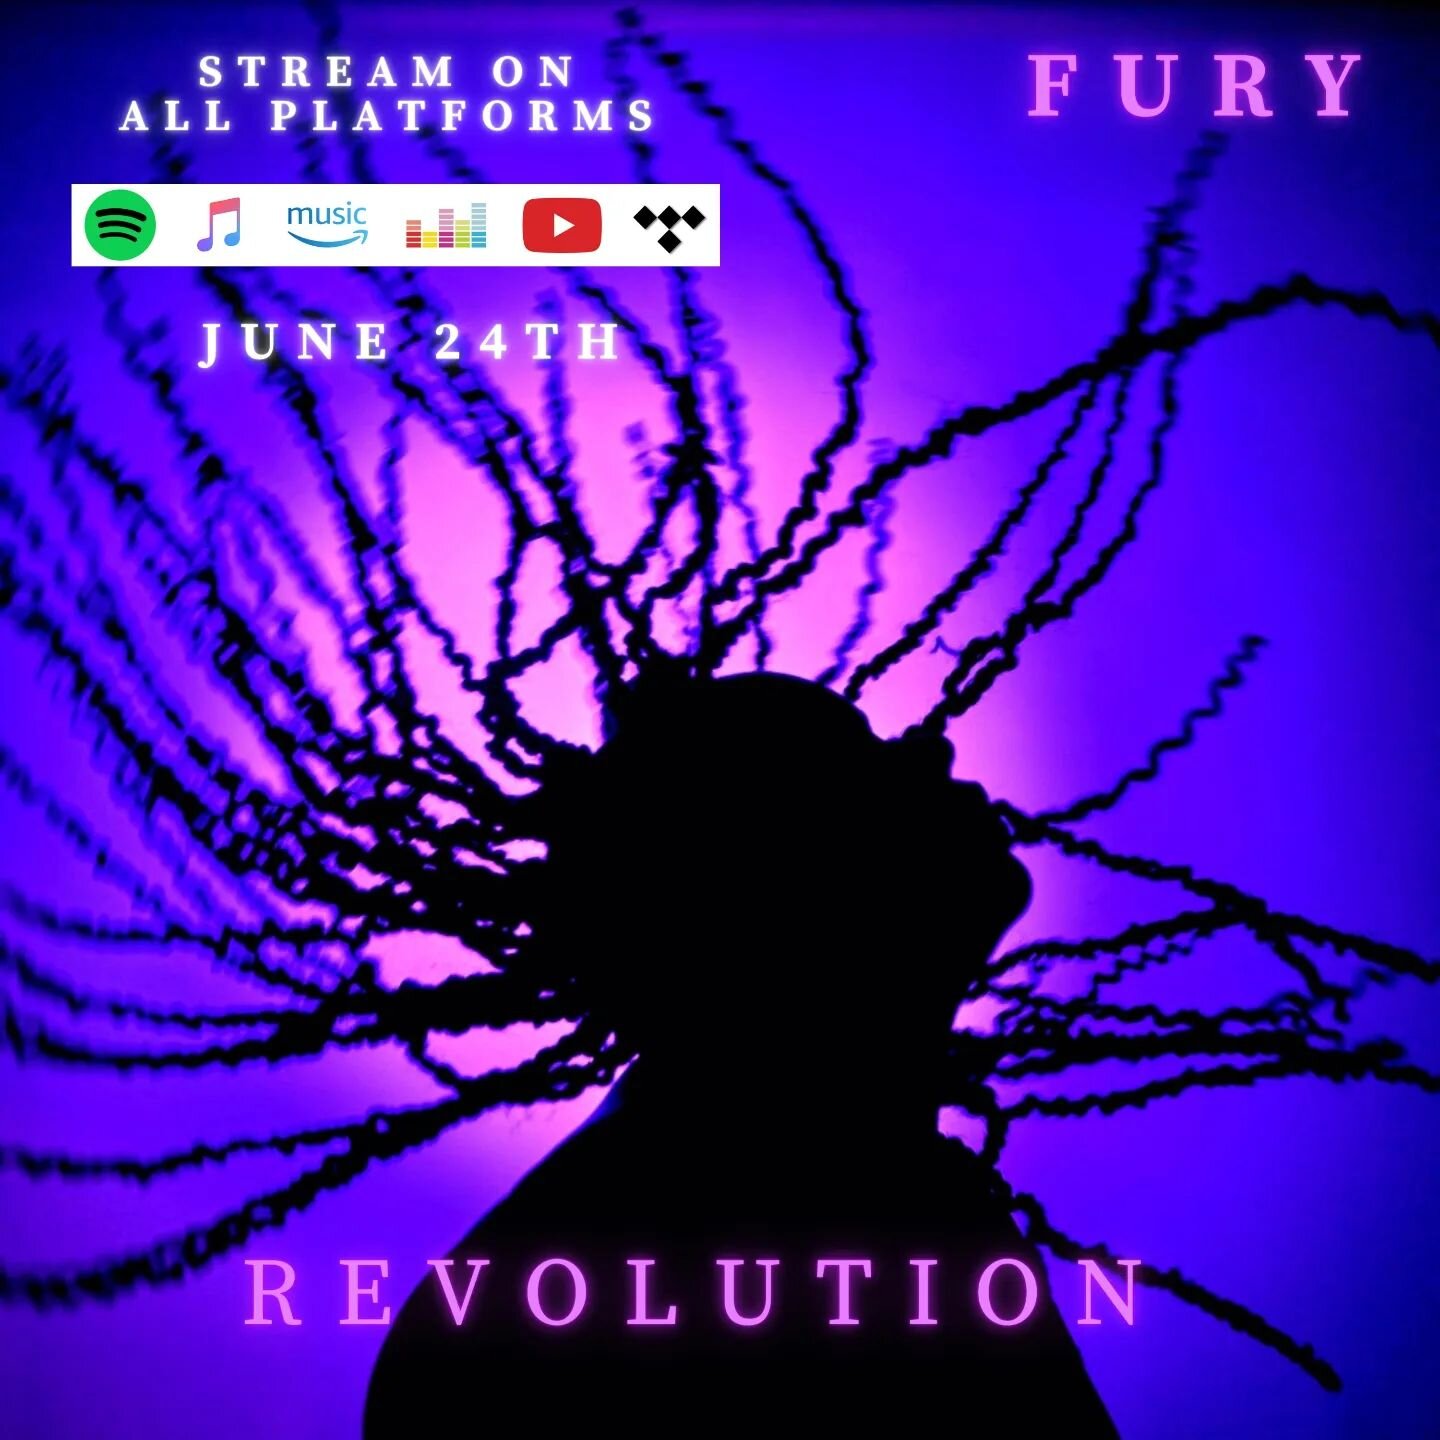 Almost here. Make sure you pre-save my new single REVOLUTION! Coming June 24th! 

.
.
.
.
#furyhiphop #fury #furyrevolution #revolution #women #coverart #chicago  #chicagomusicscene  #lyrics #chicagorapper  #womenempowerment  #chicagotalent #chicagor